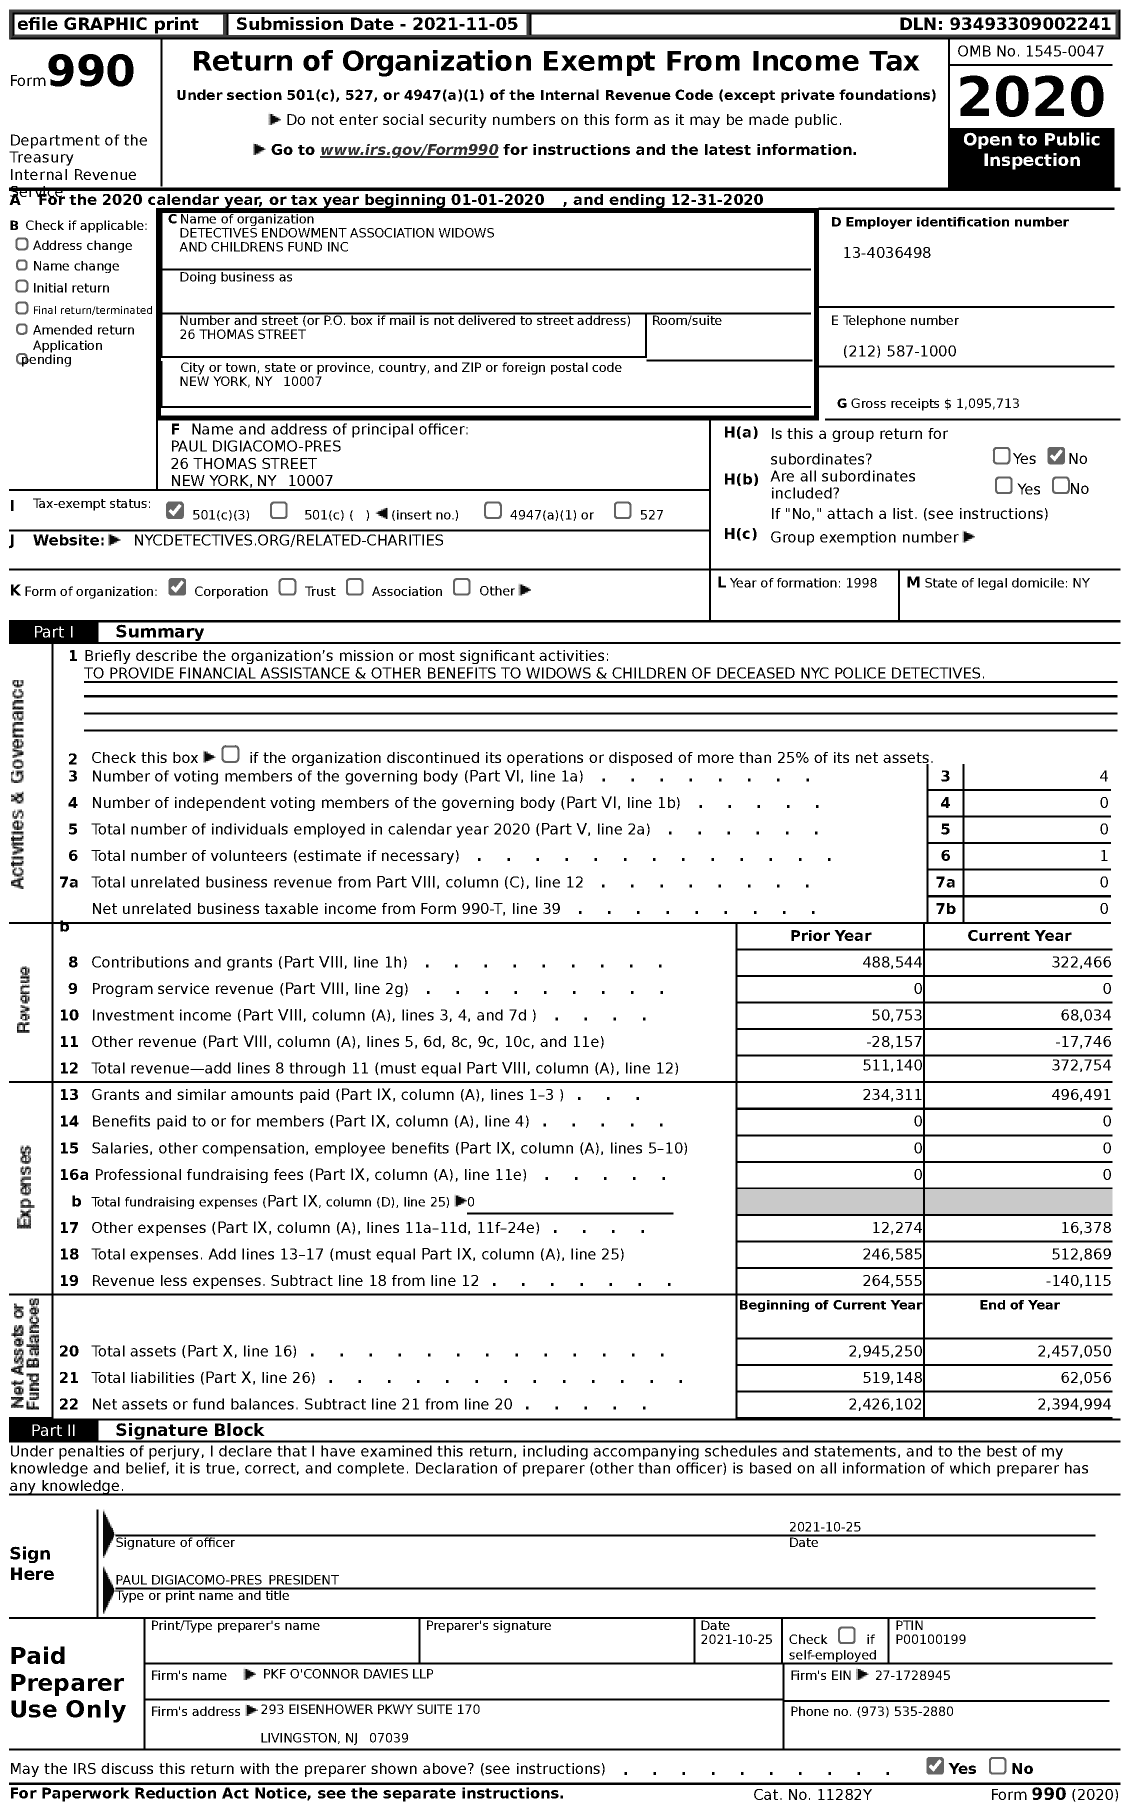 Image of first page of 2020 Form 990 for Detectives Endowment Association Widows and Childrens Fund